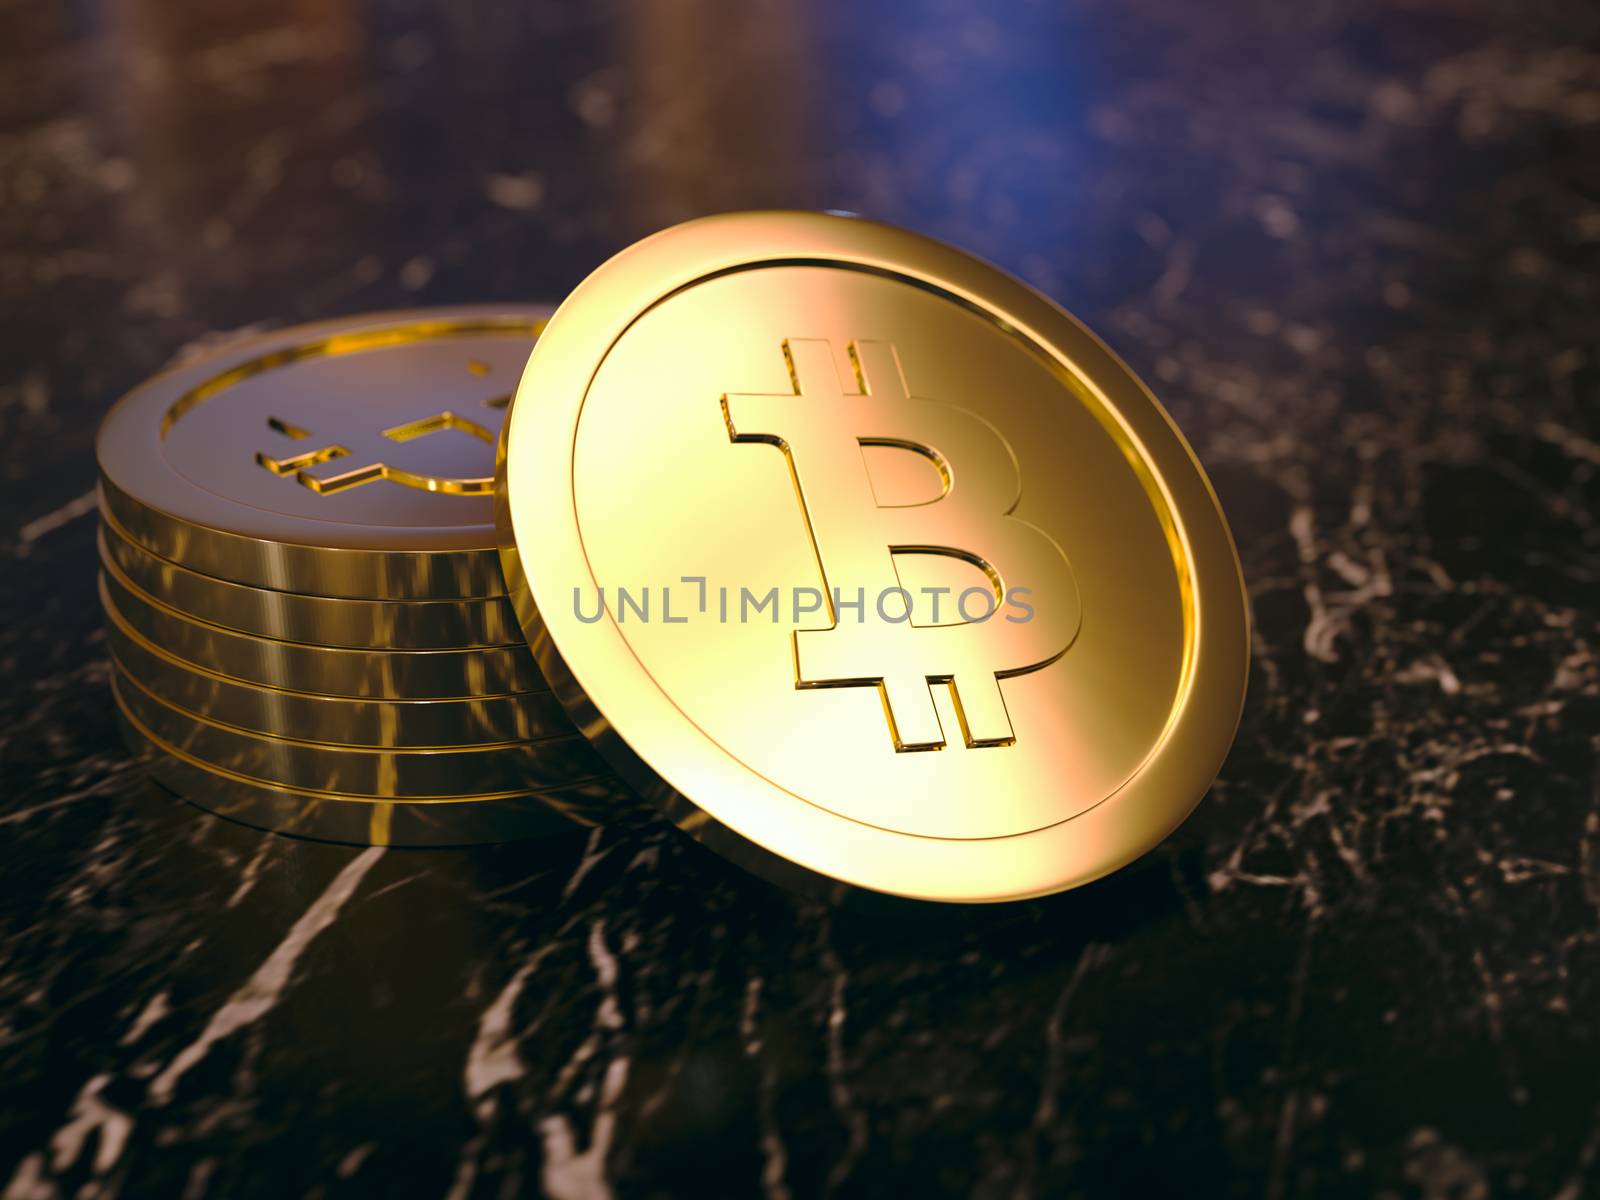 Rendering of a bitcoin propped against a stack of bitcoins on a dark background.